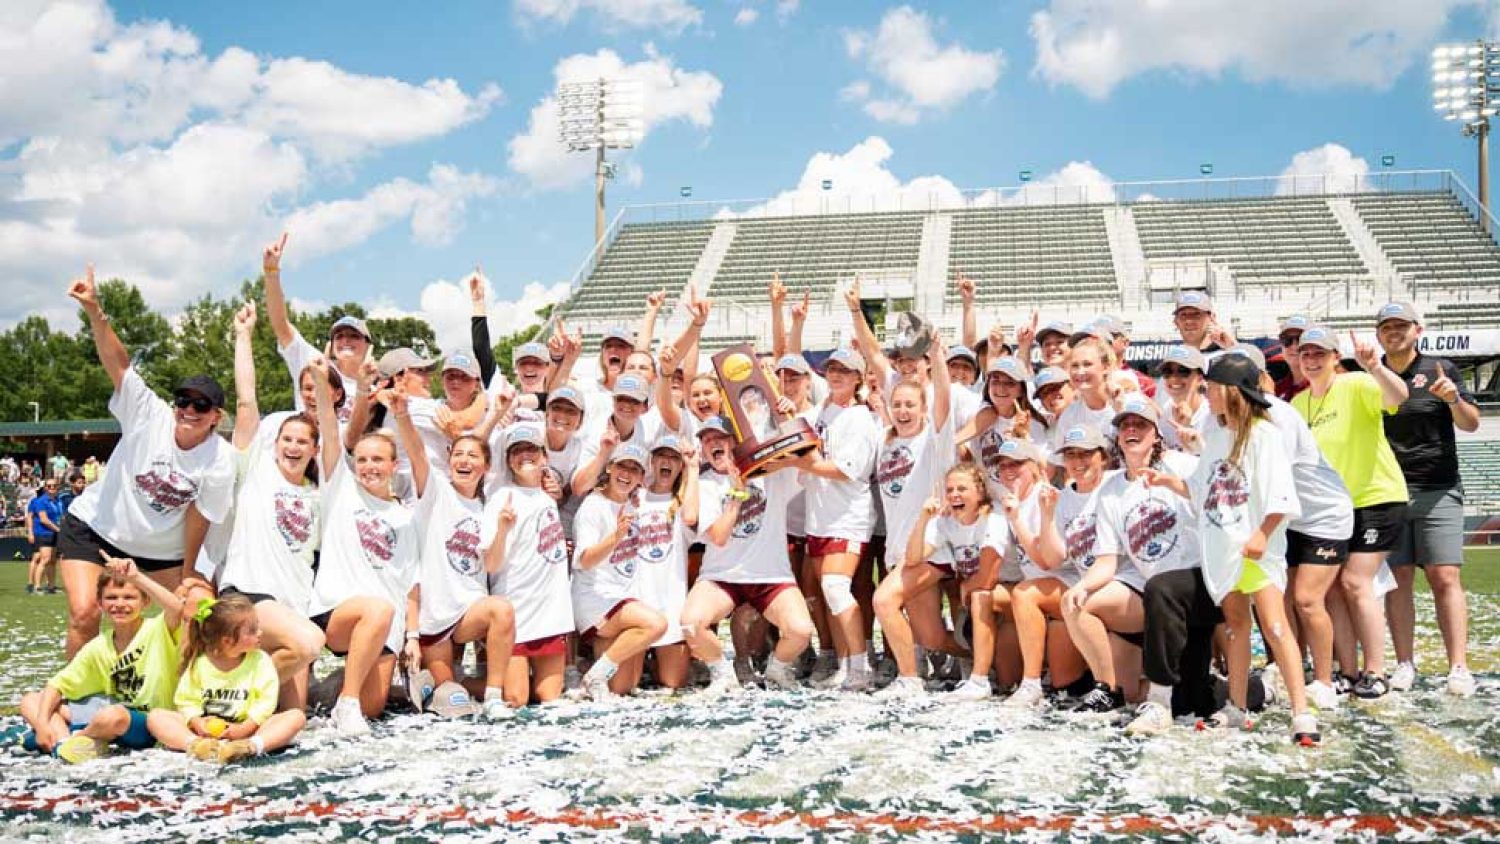 Photograph of the BC women's lacrosse players and coaching staff